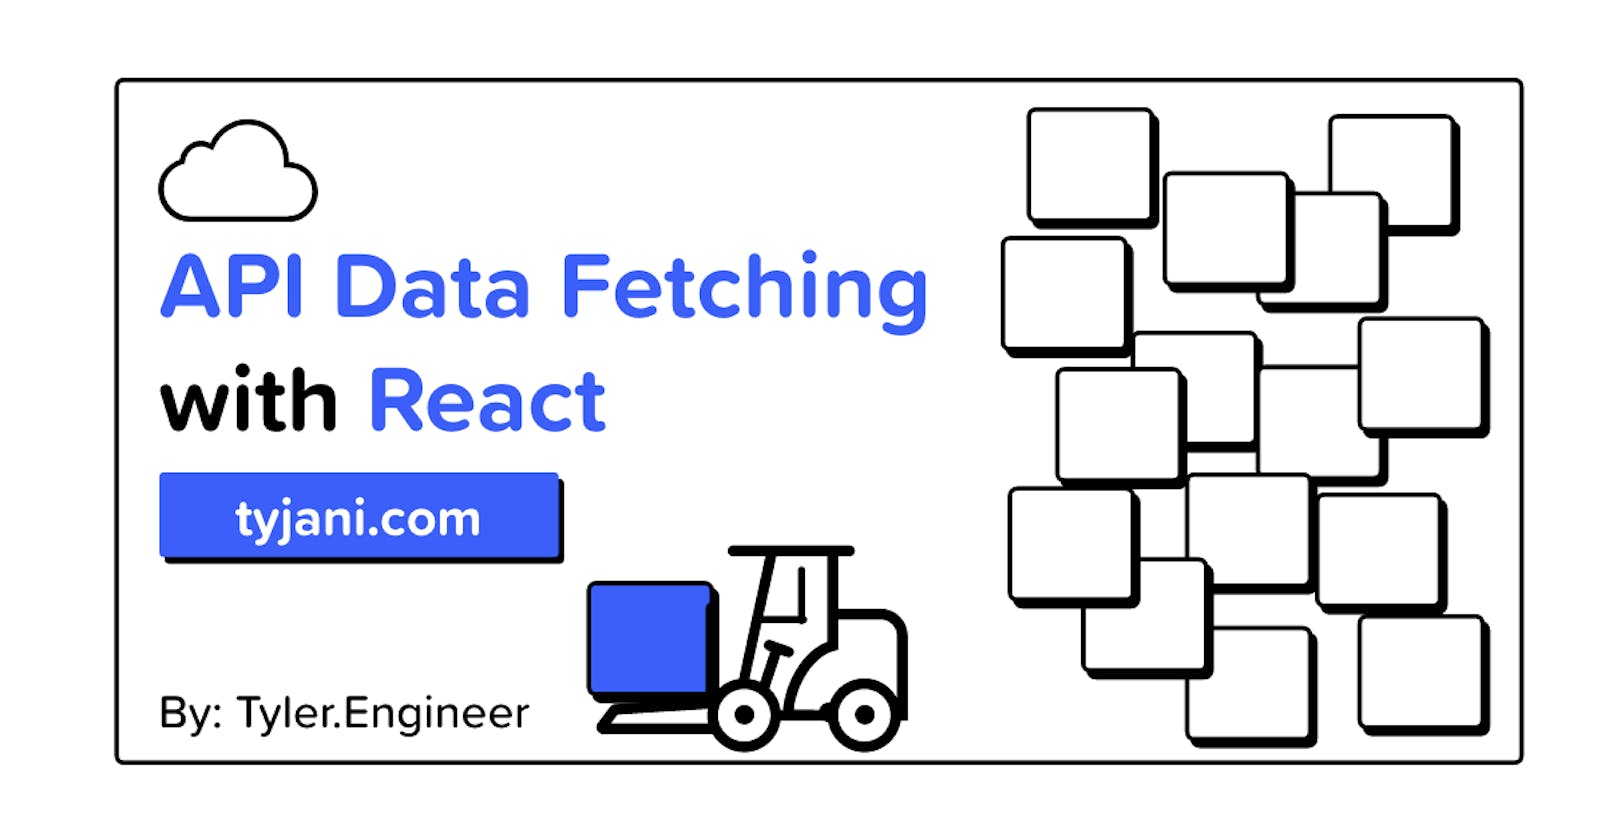 API Data Fetching with React